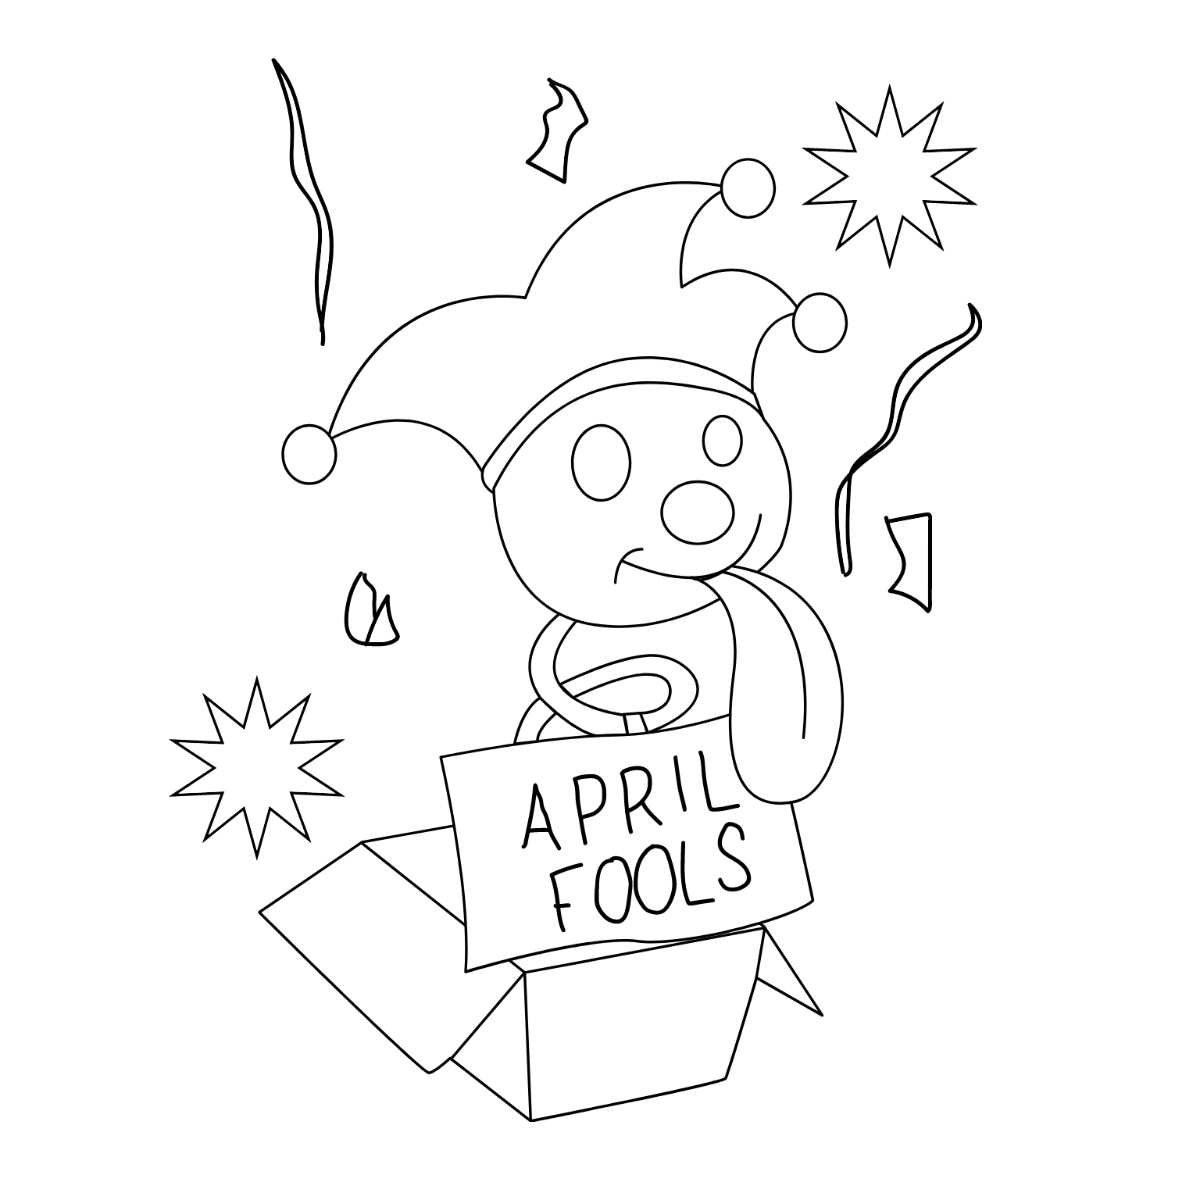 April Fools' Day Drawing Vector Template